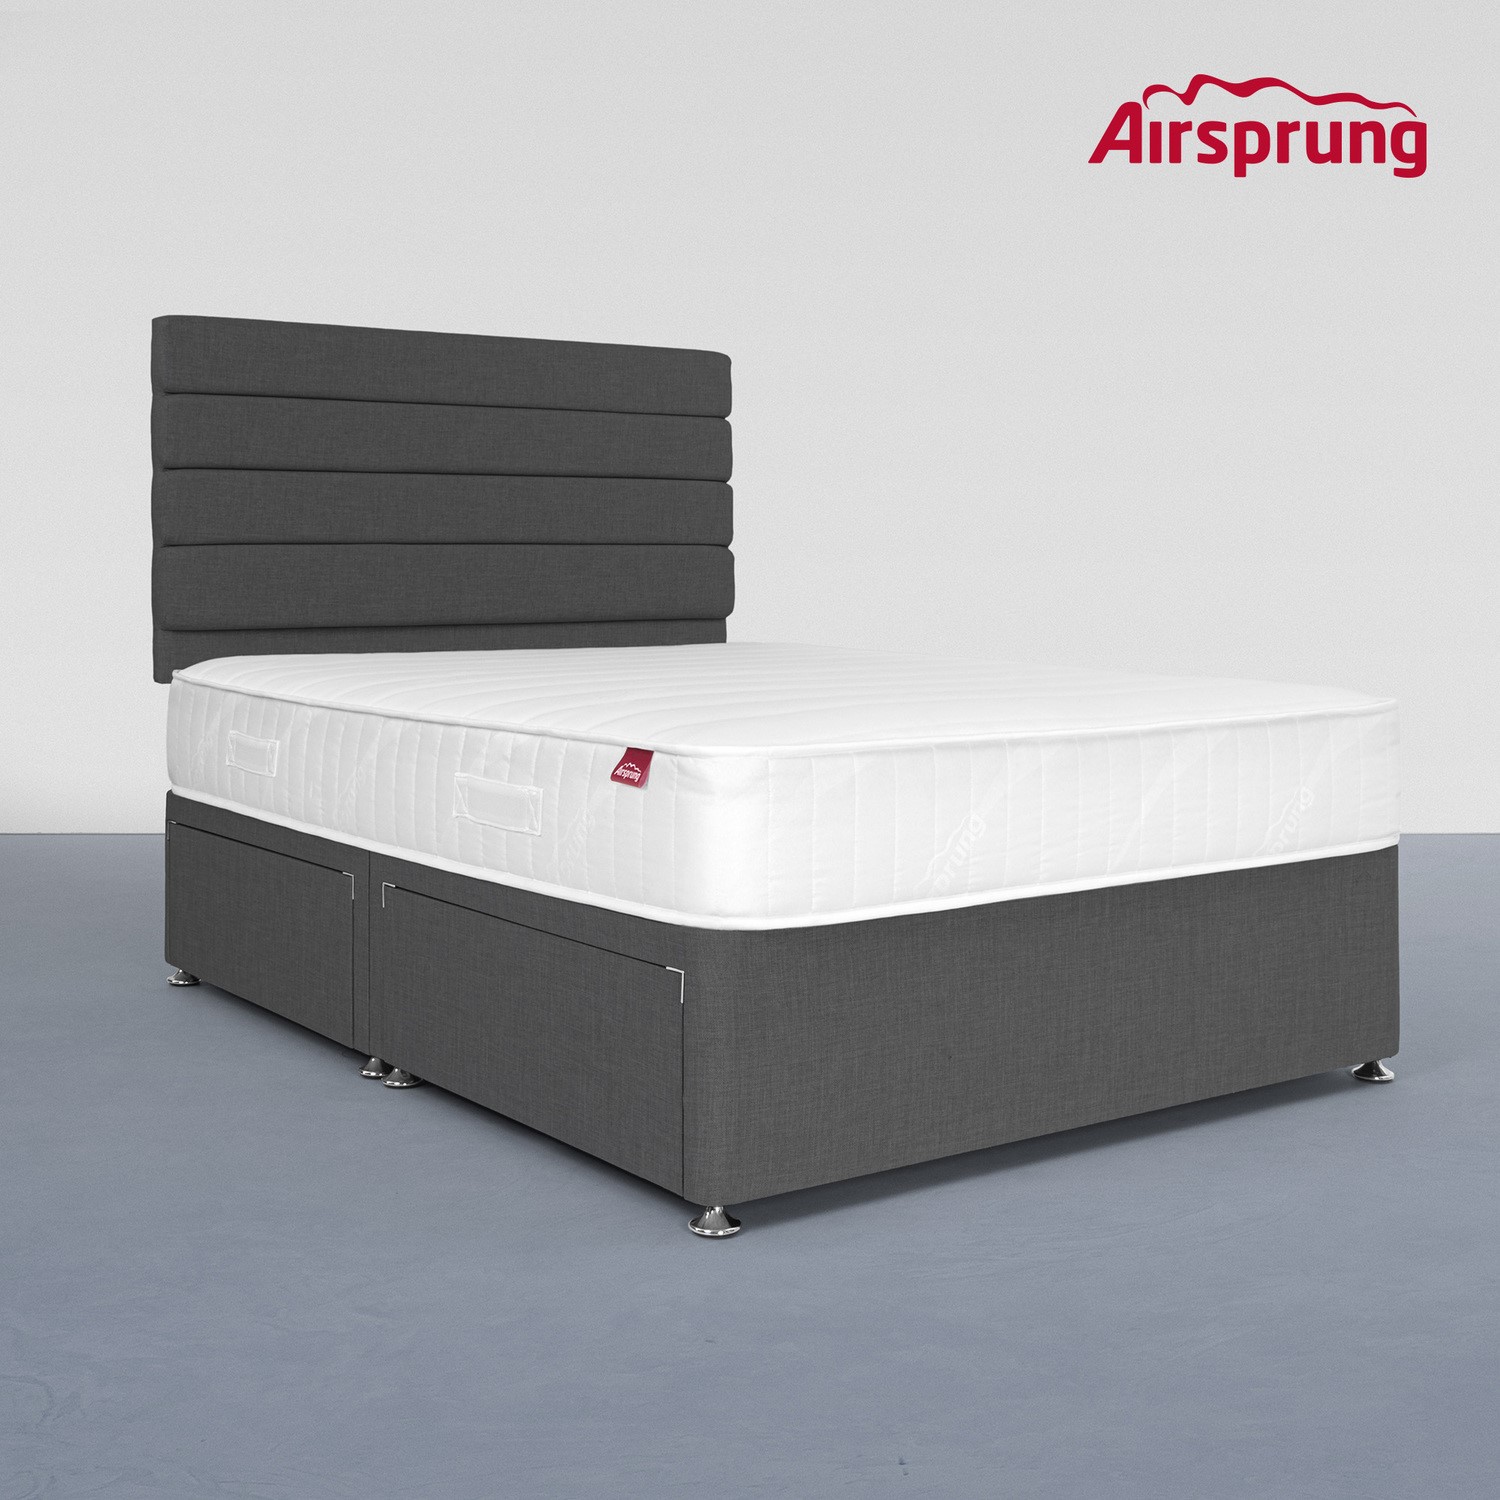 Photo of Airsprung king size 4 drawer divan bed with hybrid mattress - charcoal